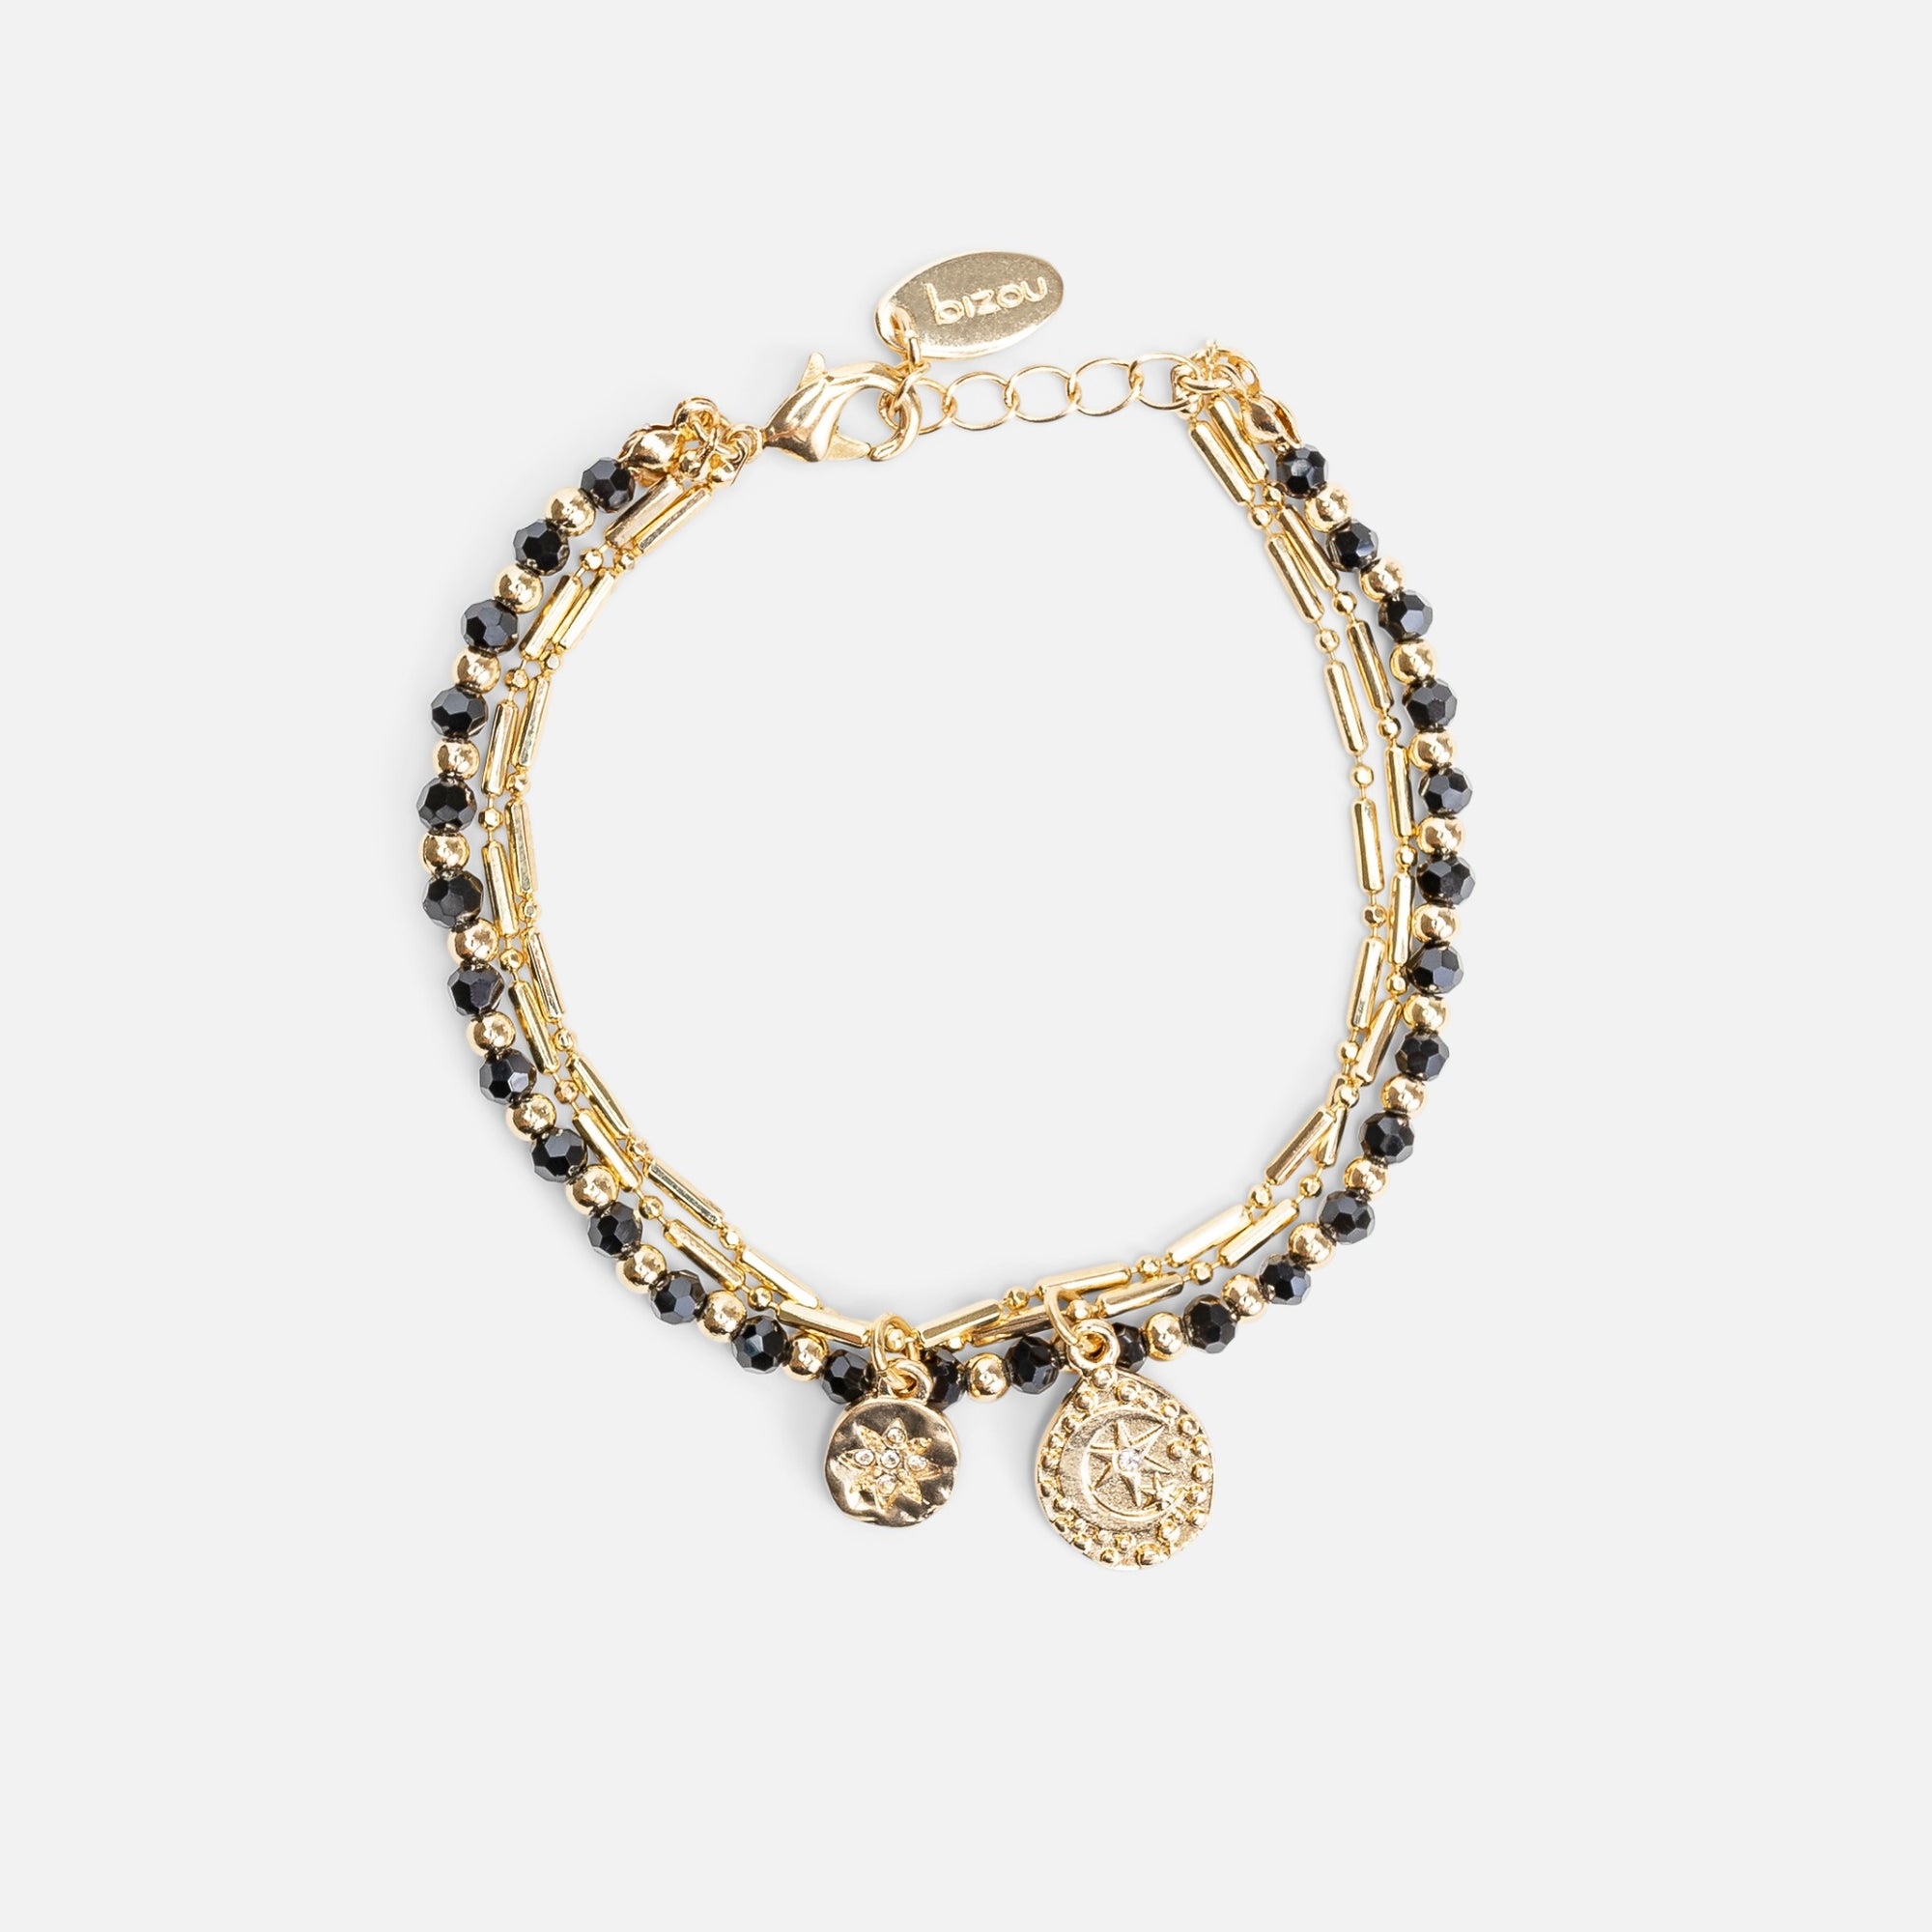 Golden and black double chain bracelet with charms